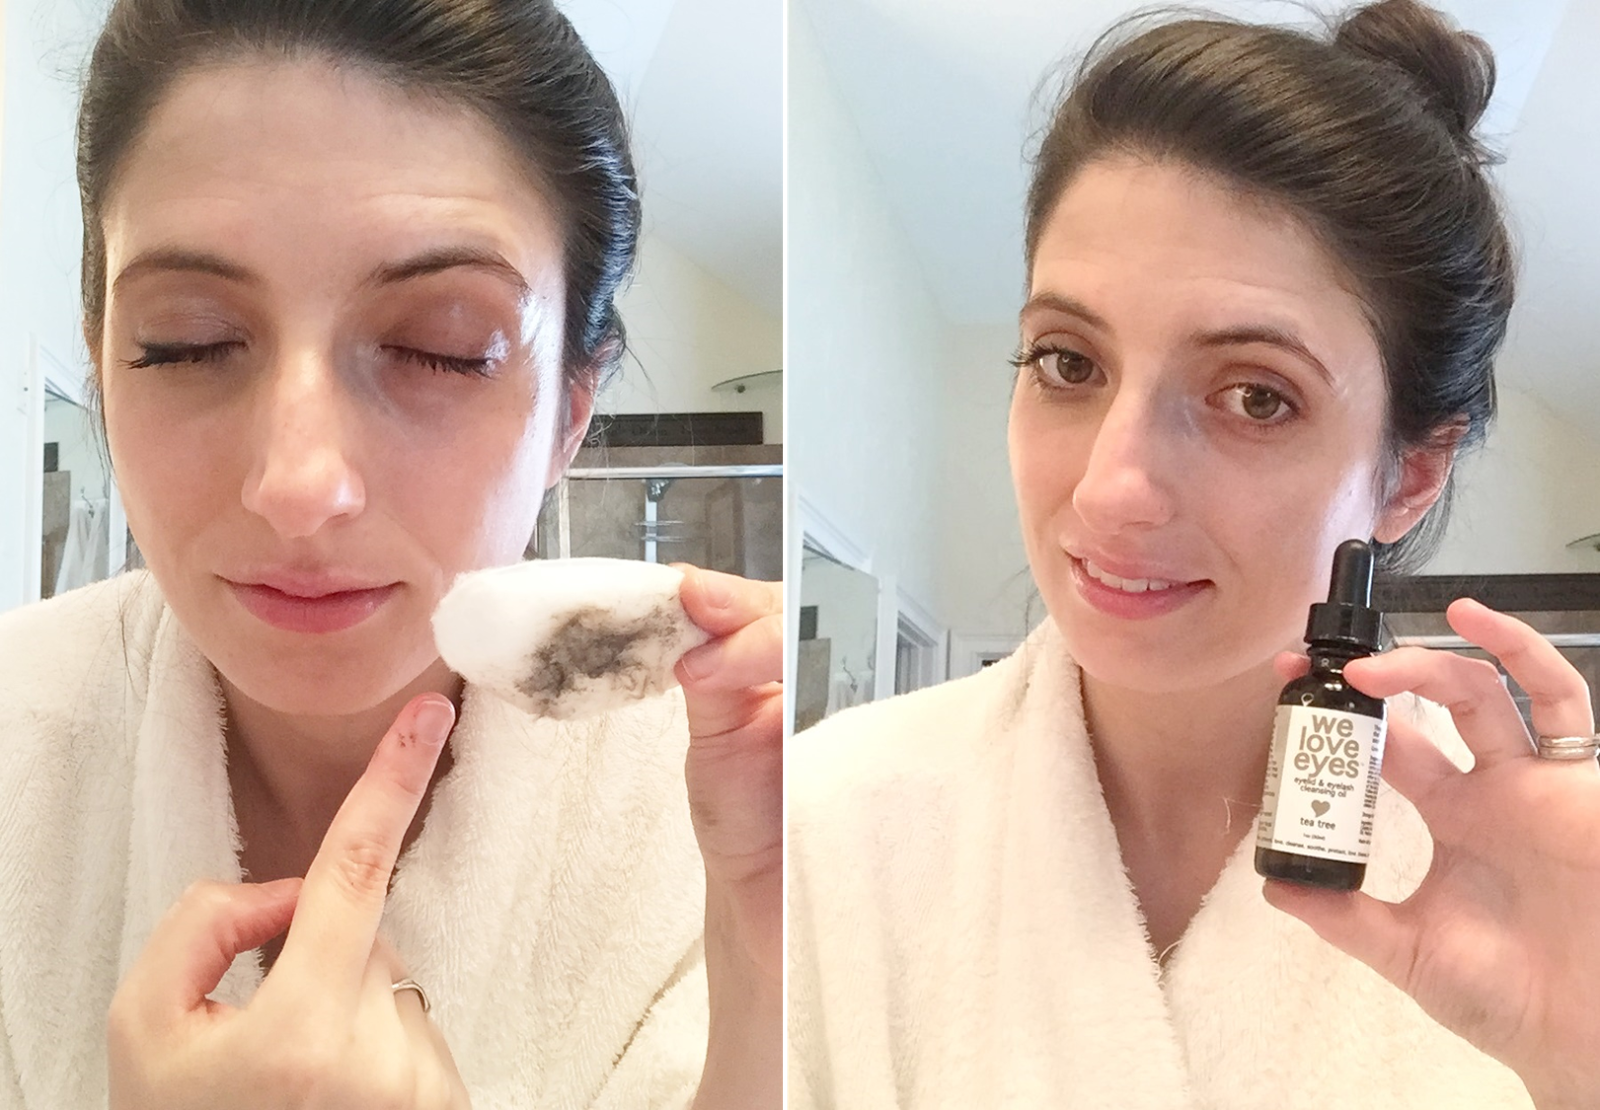 Eyedolatry: it All Off: We Eyes Delivers All-Natural Make-Up Removal